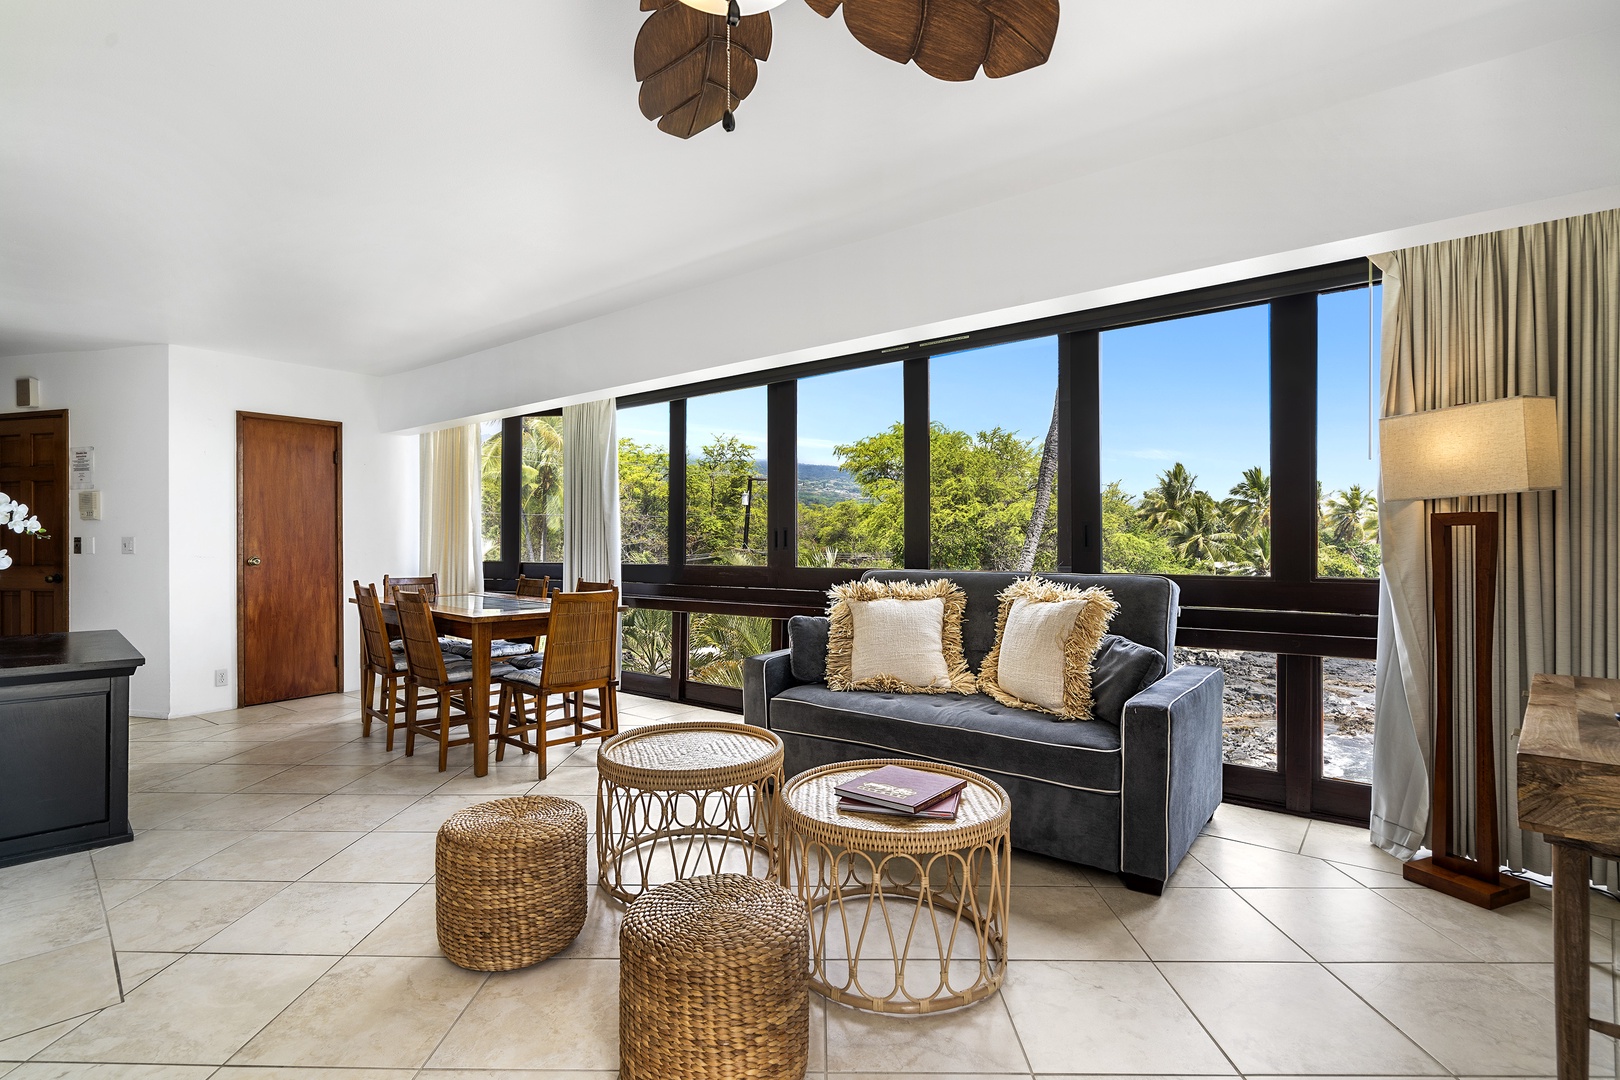 Kailua Kona Vacation Rentals, Kona's Shangri La - Spacious open sight lines with large windows that open to the views